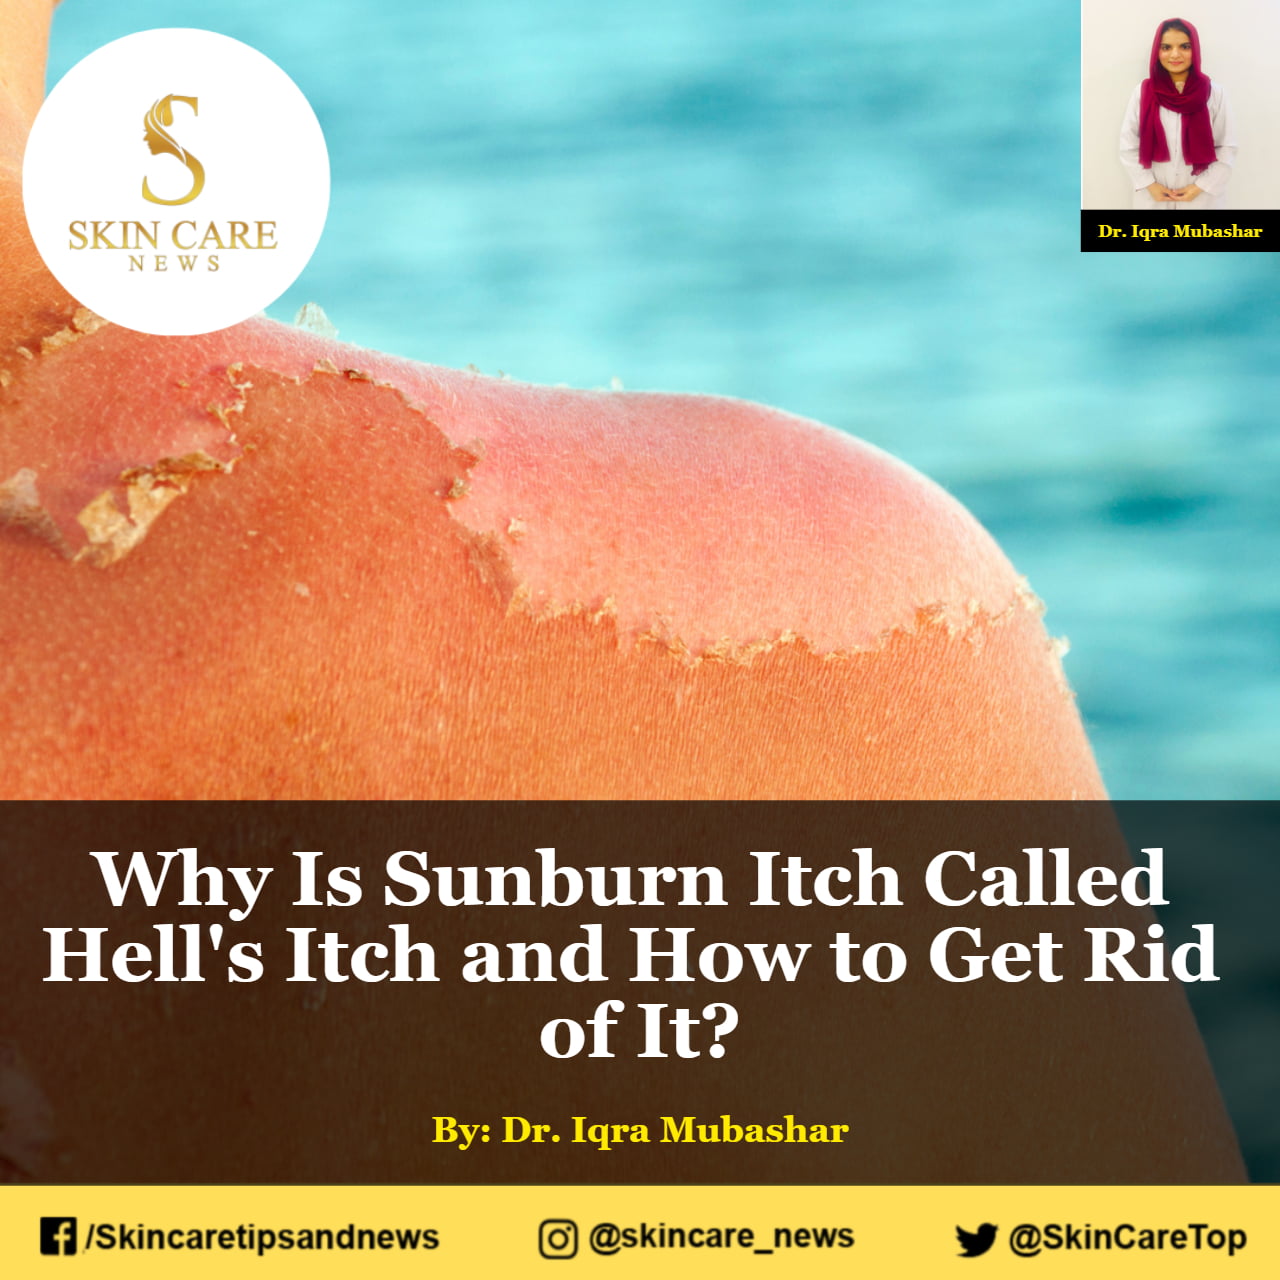 Why Is Sunburn Itch Called Hells Itch And How To Get Rid Of It